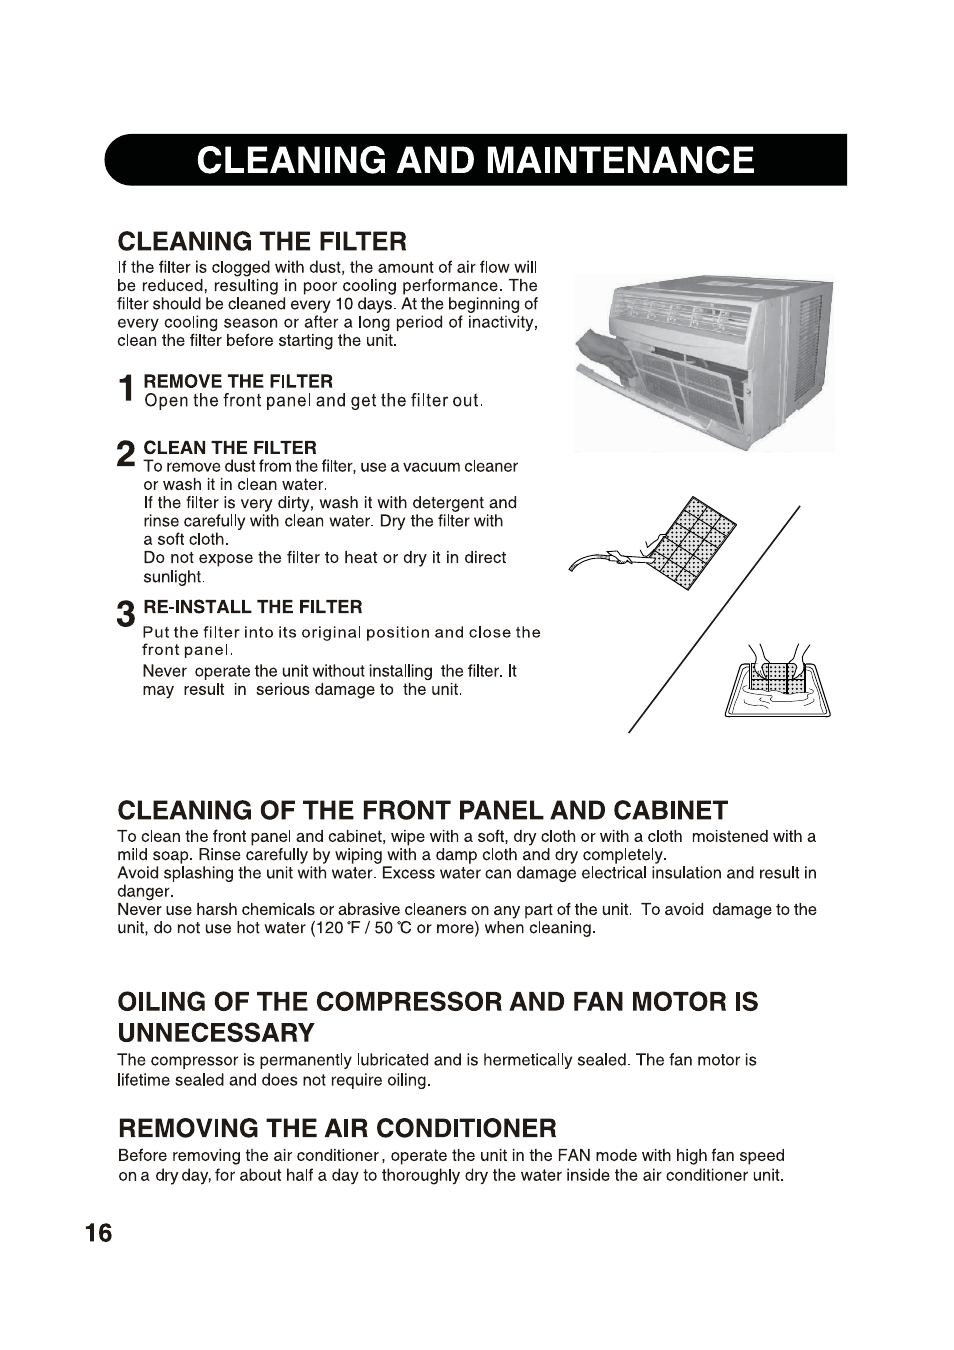 Cleaning and maintenance, 4 remove the filter, Clean the filter | Sharp  2020215A0343 User Manual | Page 16 / 20 | Original mode